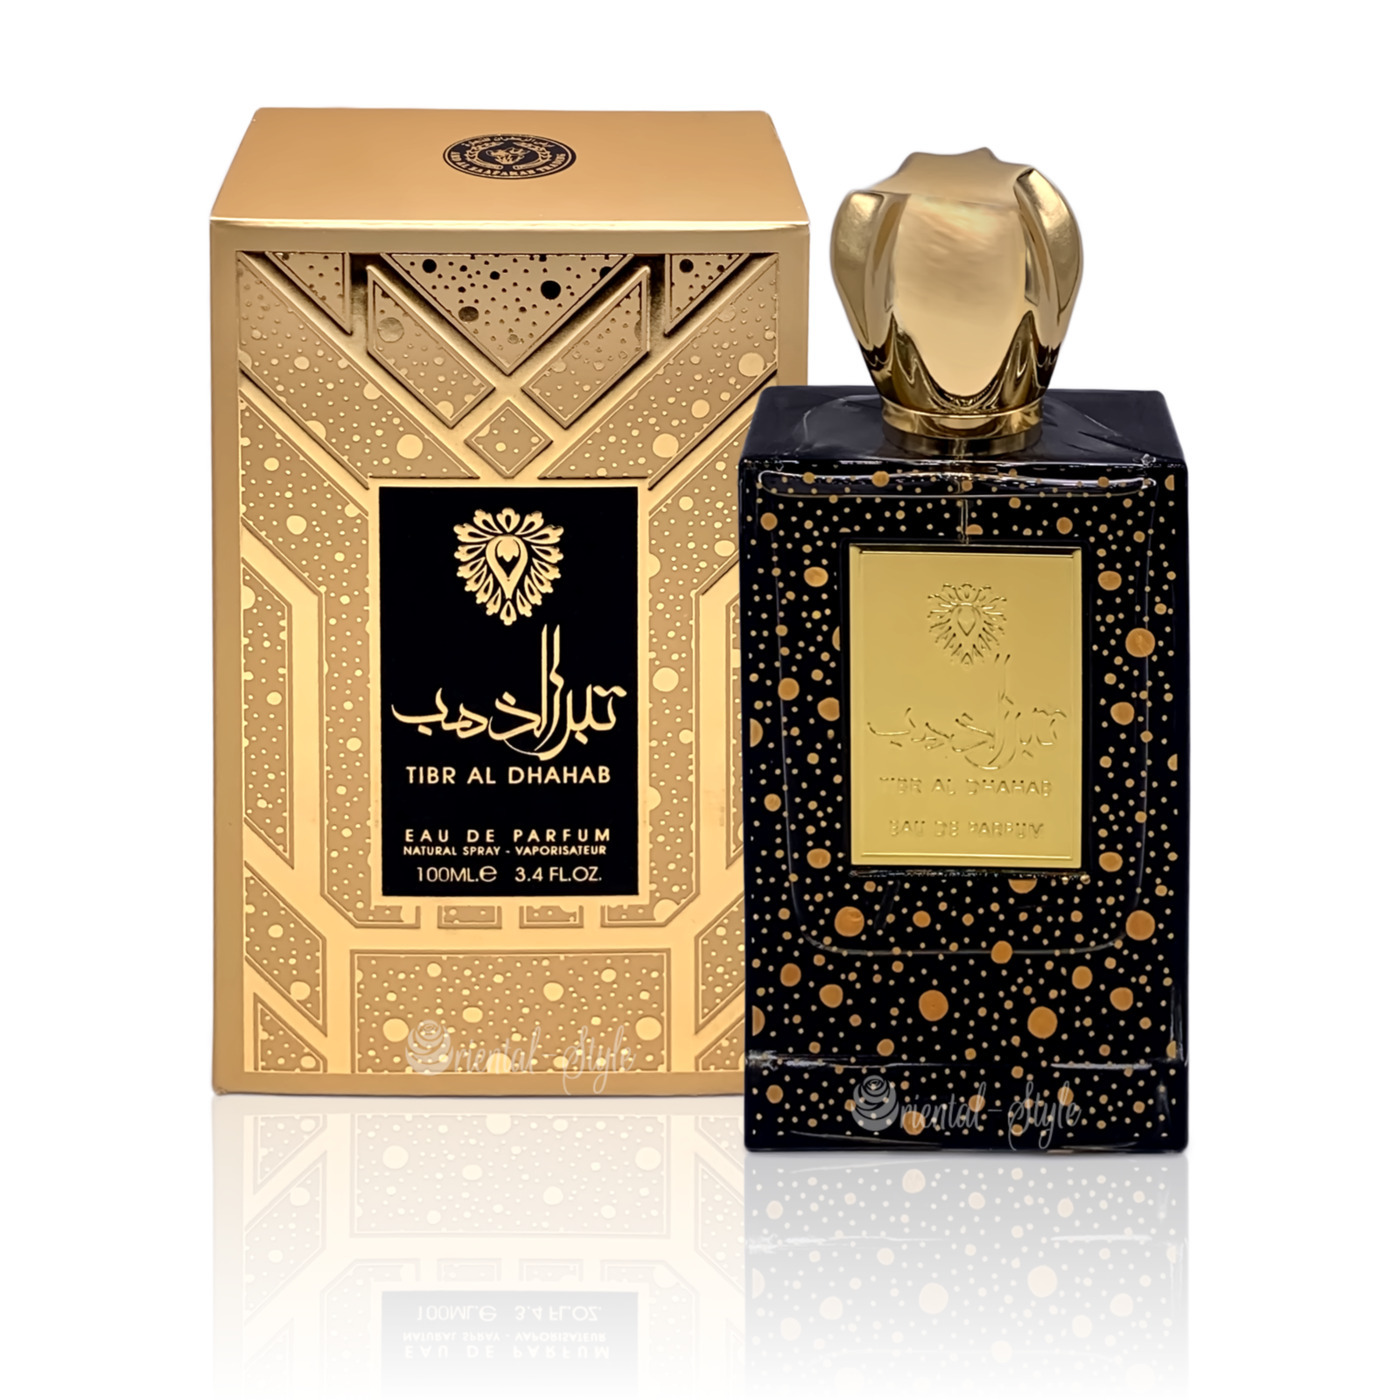 Initio Parfums prives oud for Greatness